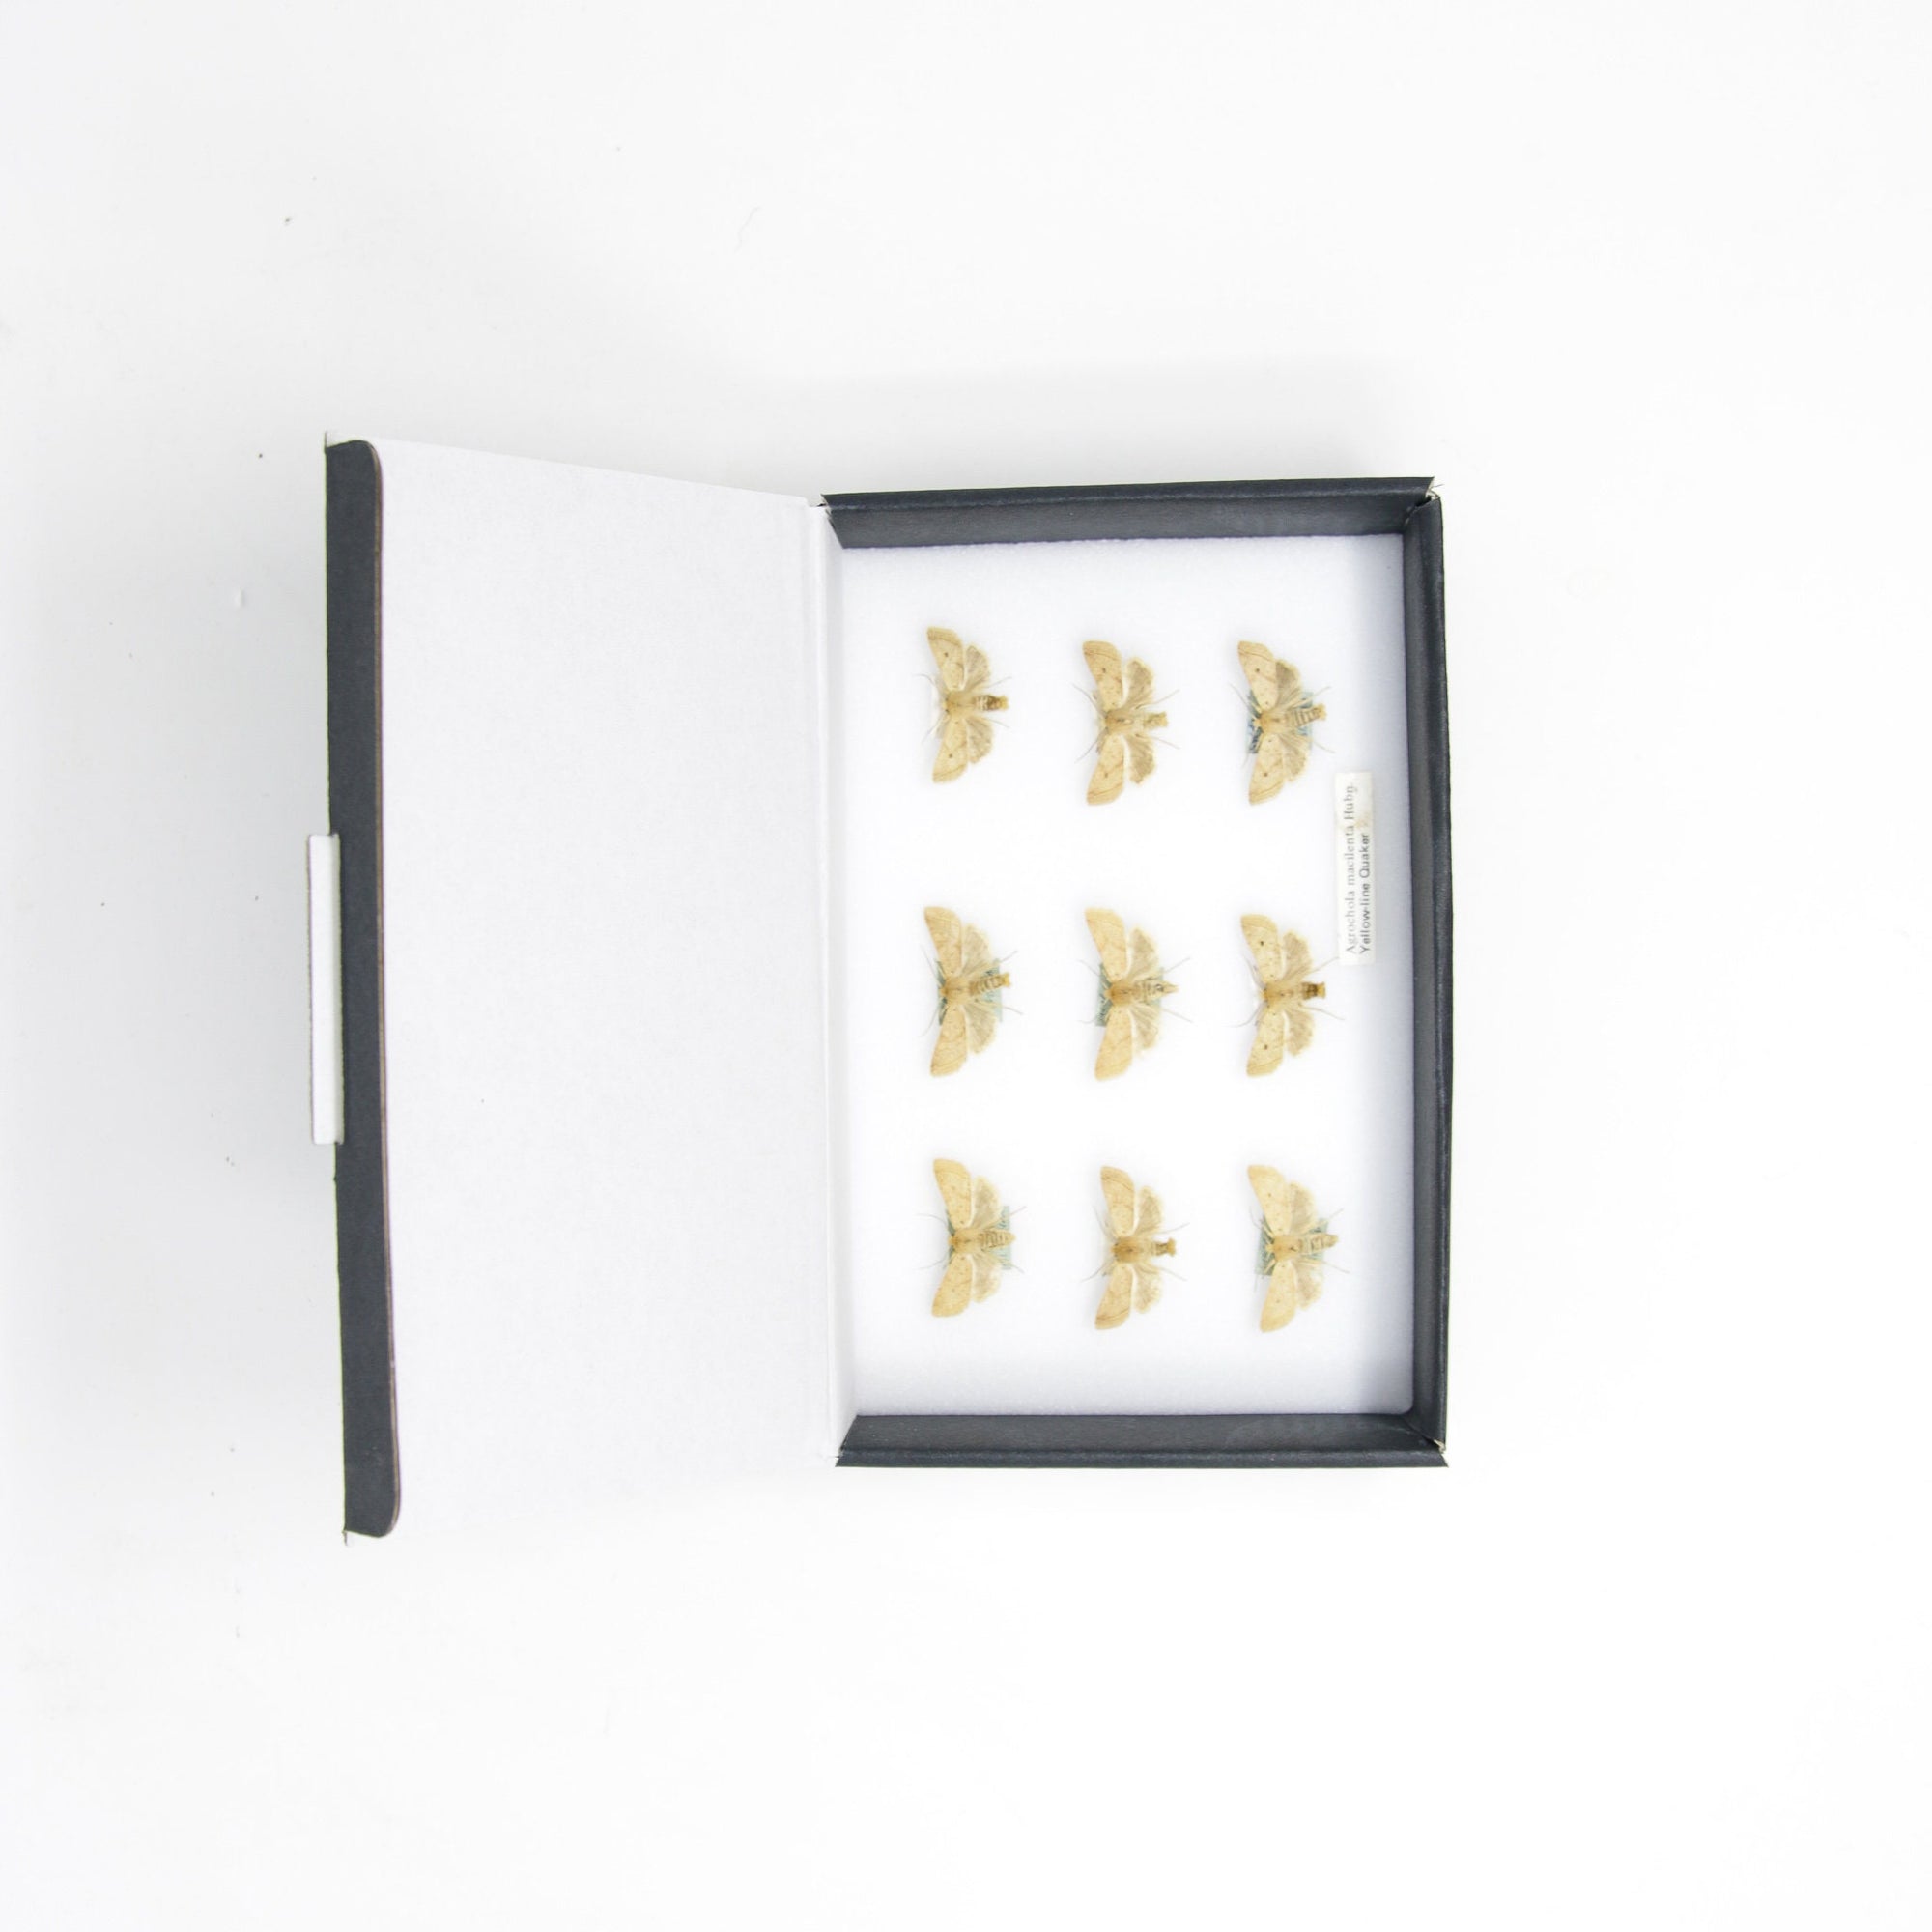 A Boxed Collection of Pretty Vintage Moths, Yellow-line Quaker Moths with Scientific Collection Data, A1 Quality, Entomology Specimens #AU07